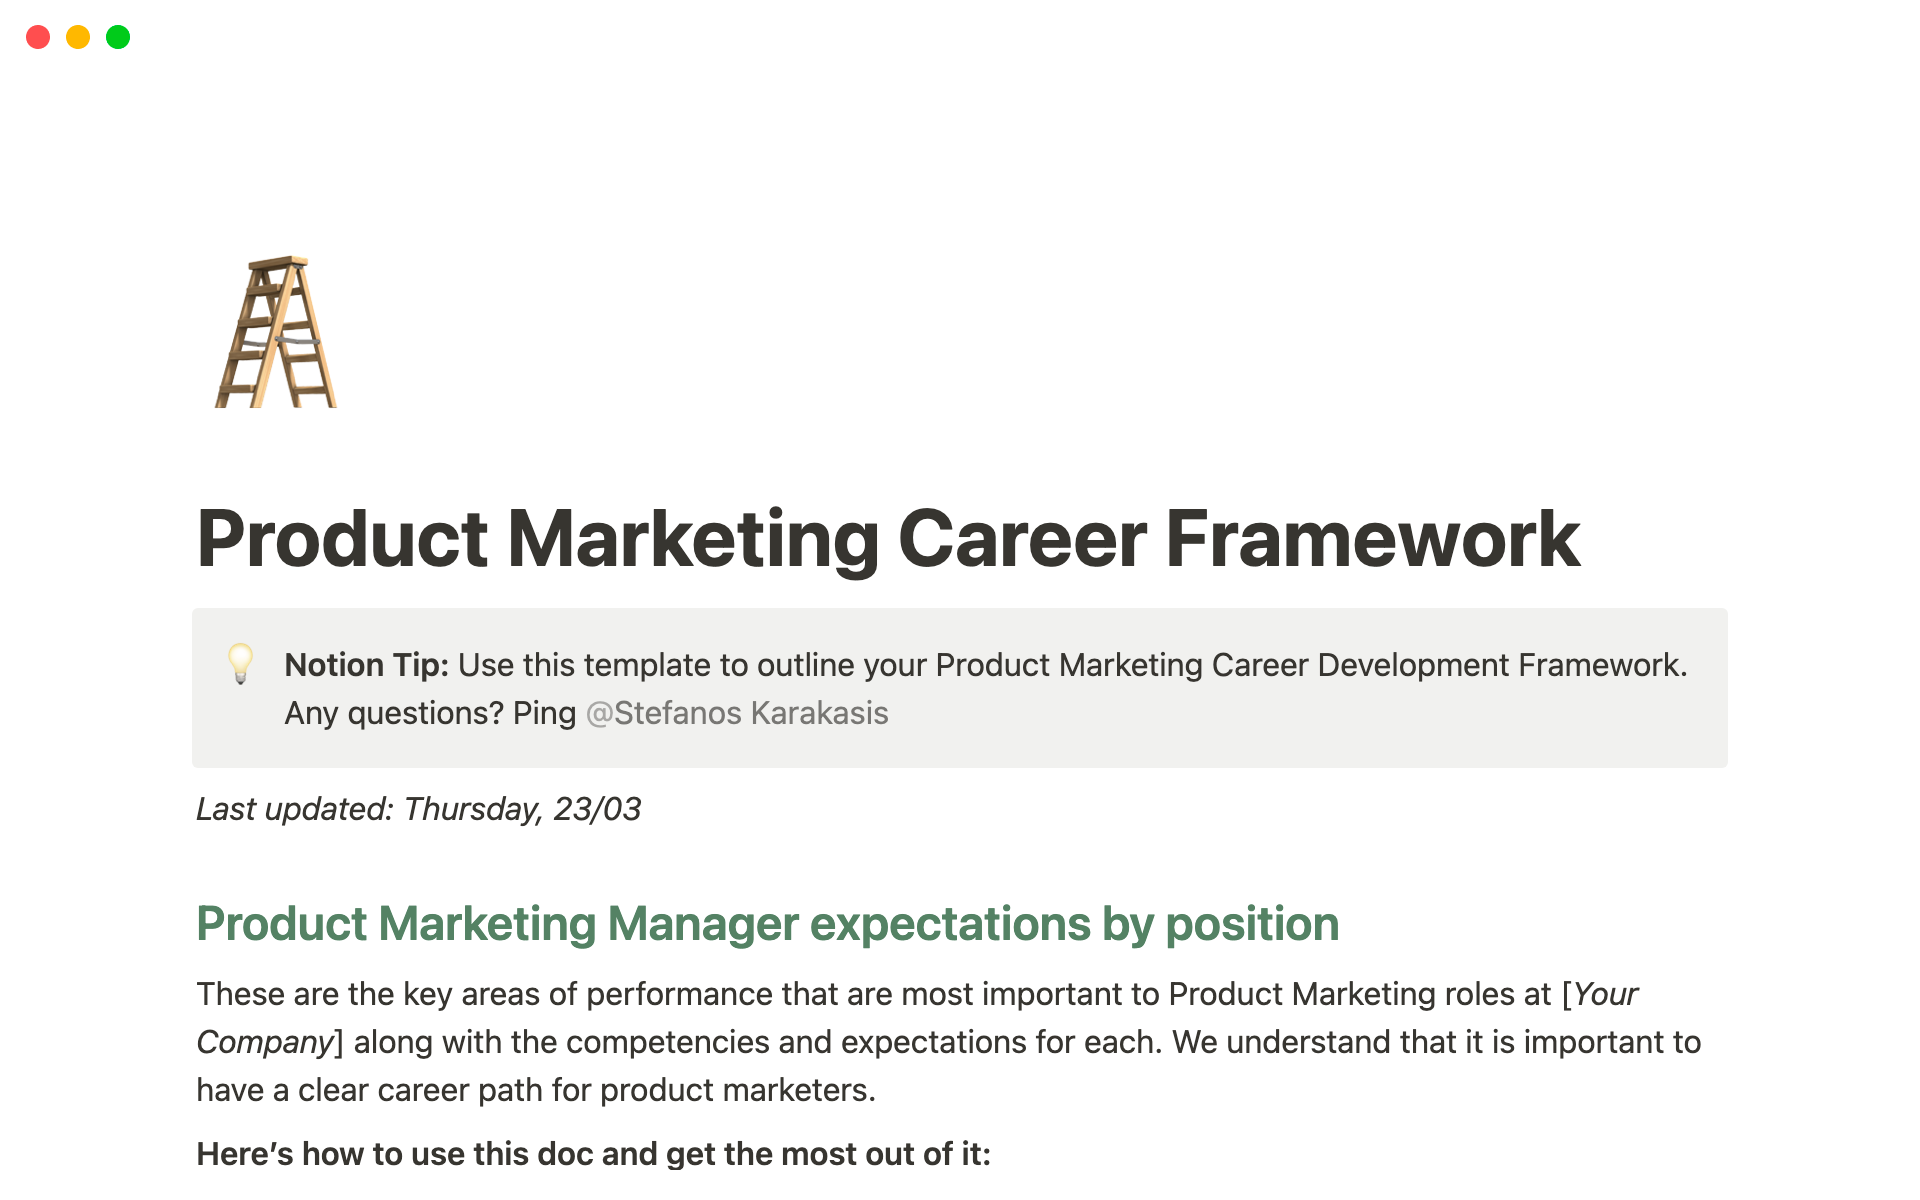 Helps to define and measure career growth for your product marketing team.